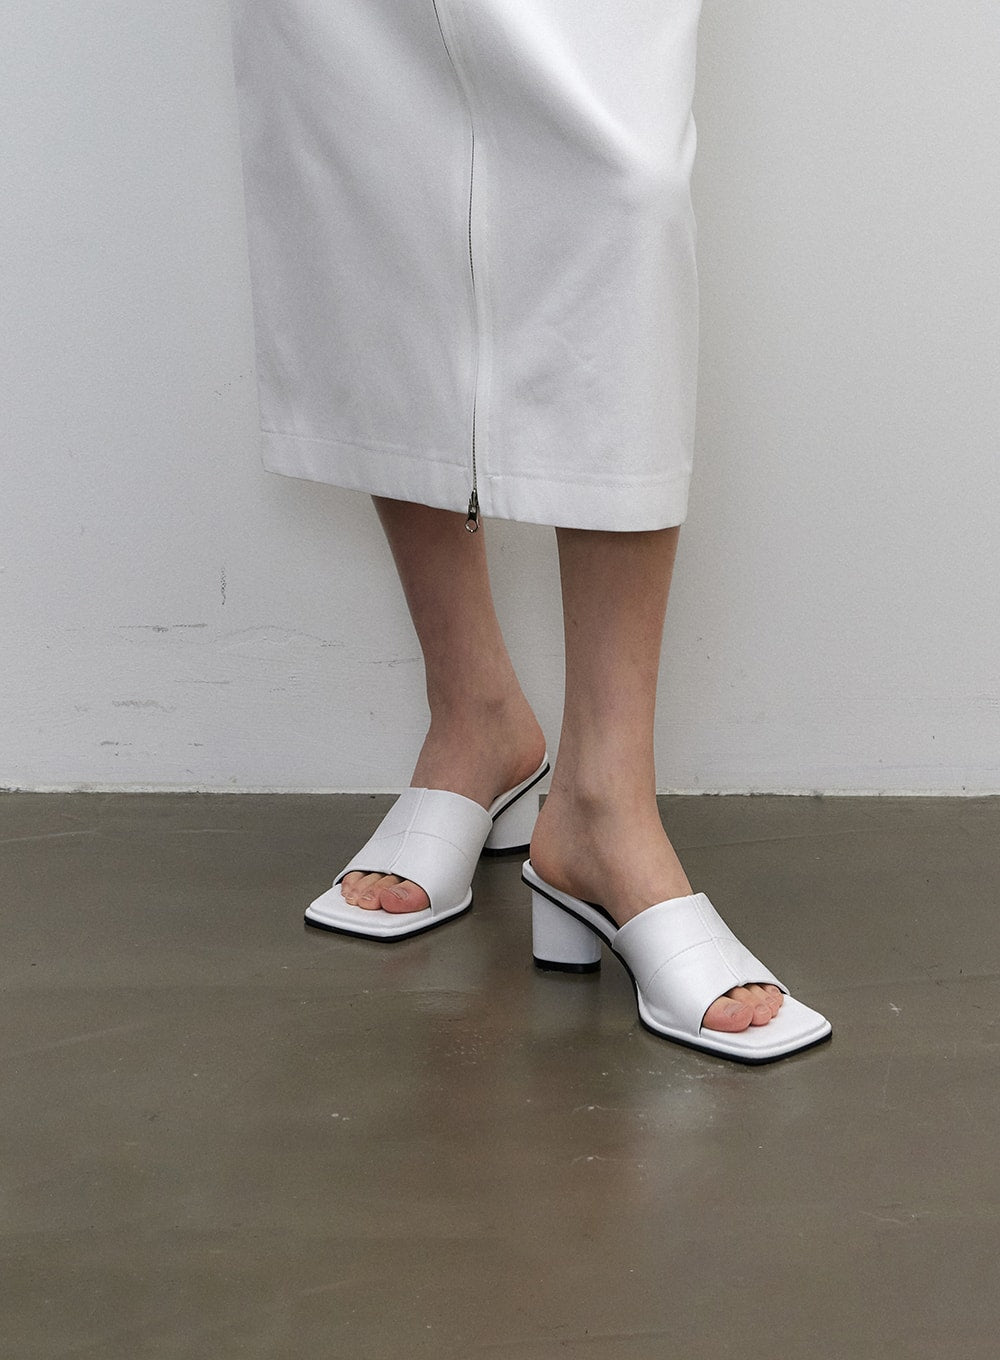 square-open-toe-mules-iy331